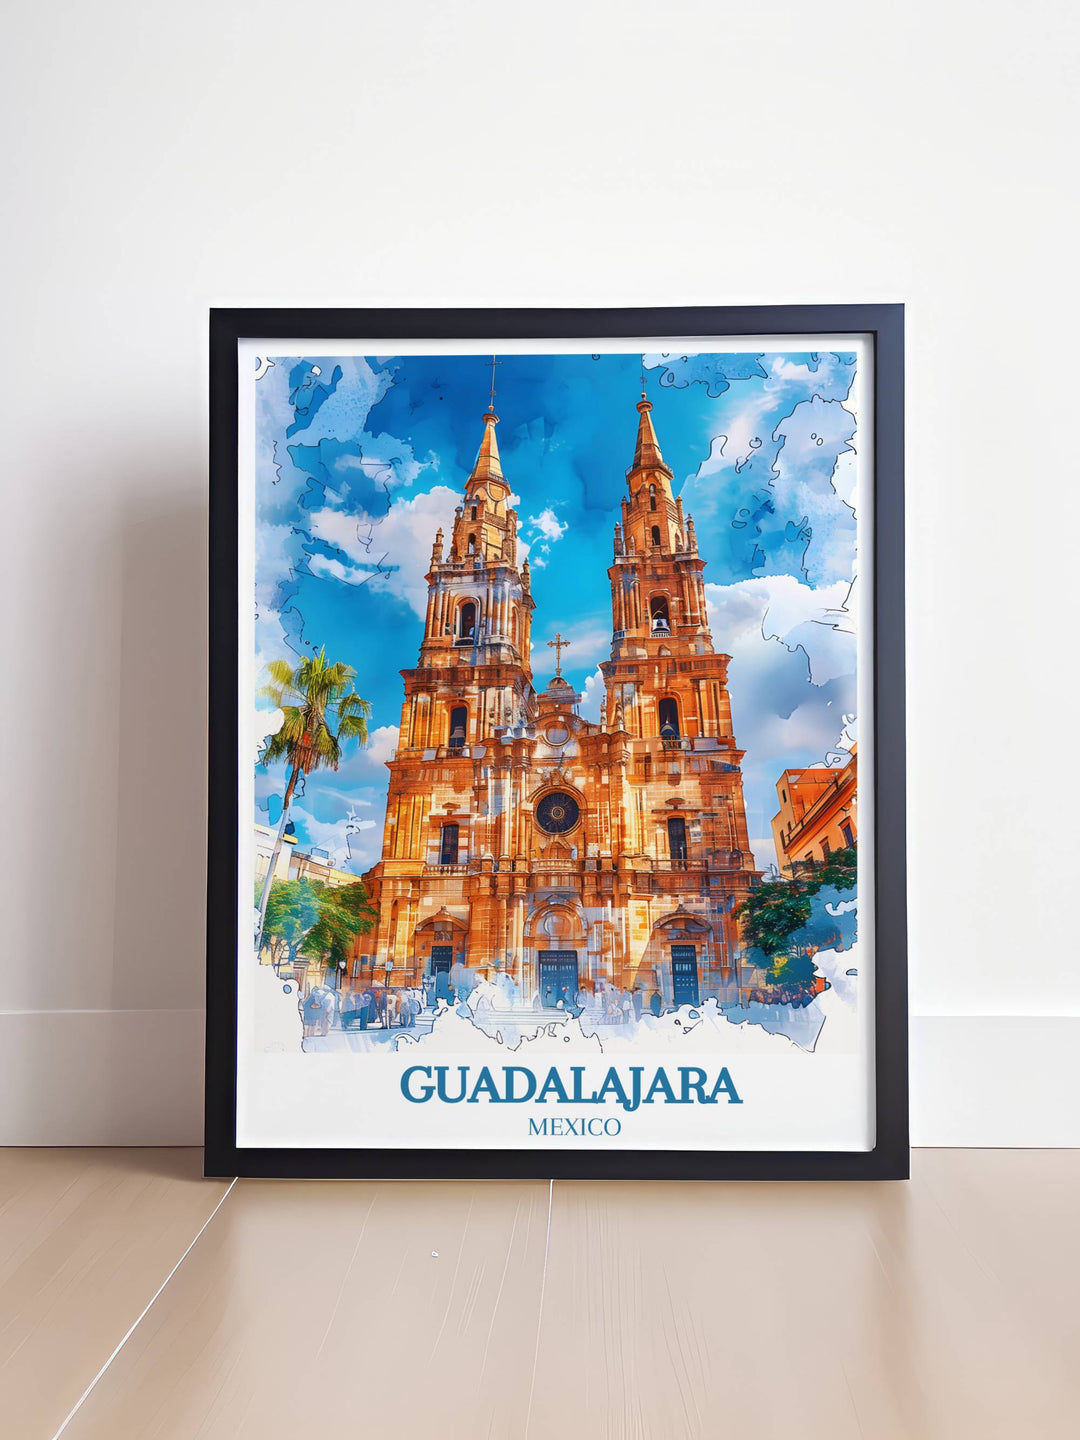 Dynamic print showcasing the lively atmosphere of Guadalajaras markets, filled with colorful crafts and bustling activity, embodying the citys vibrant culture.